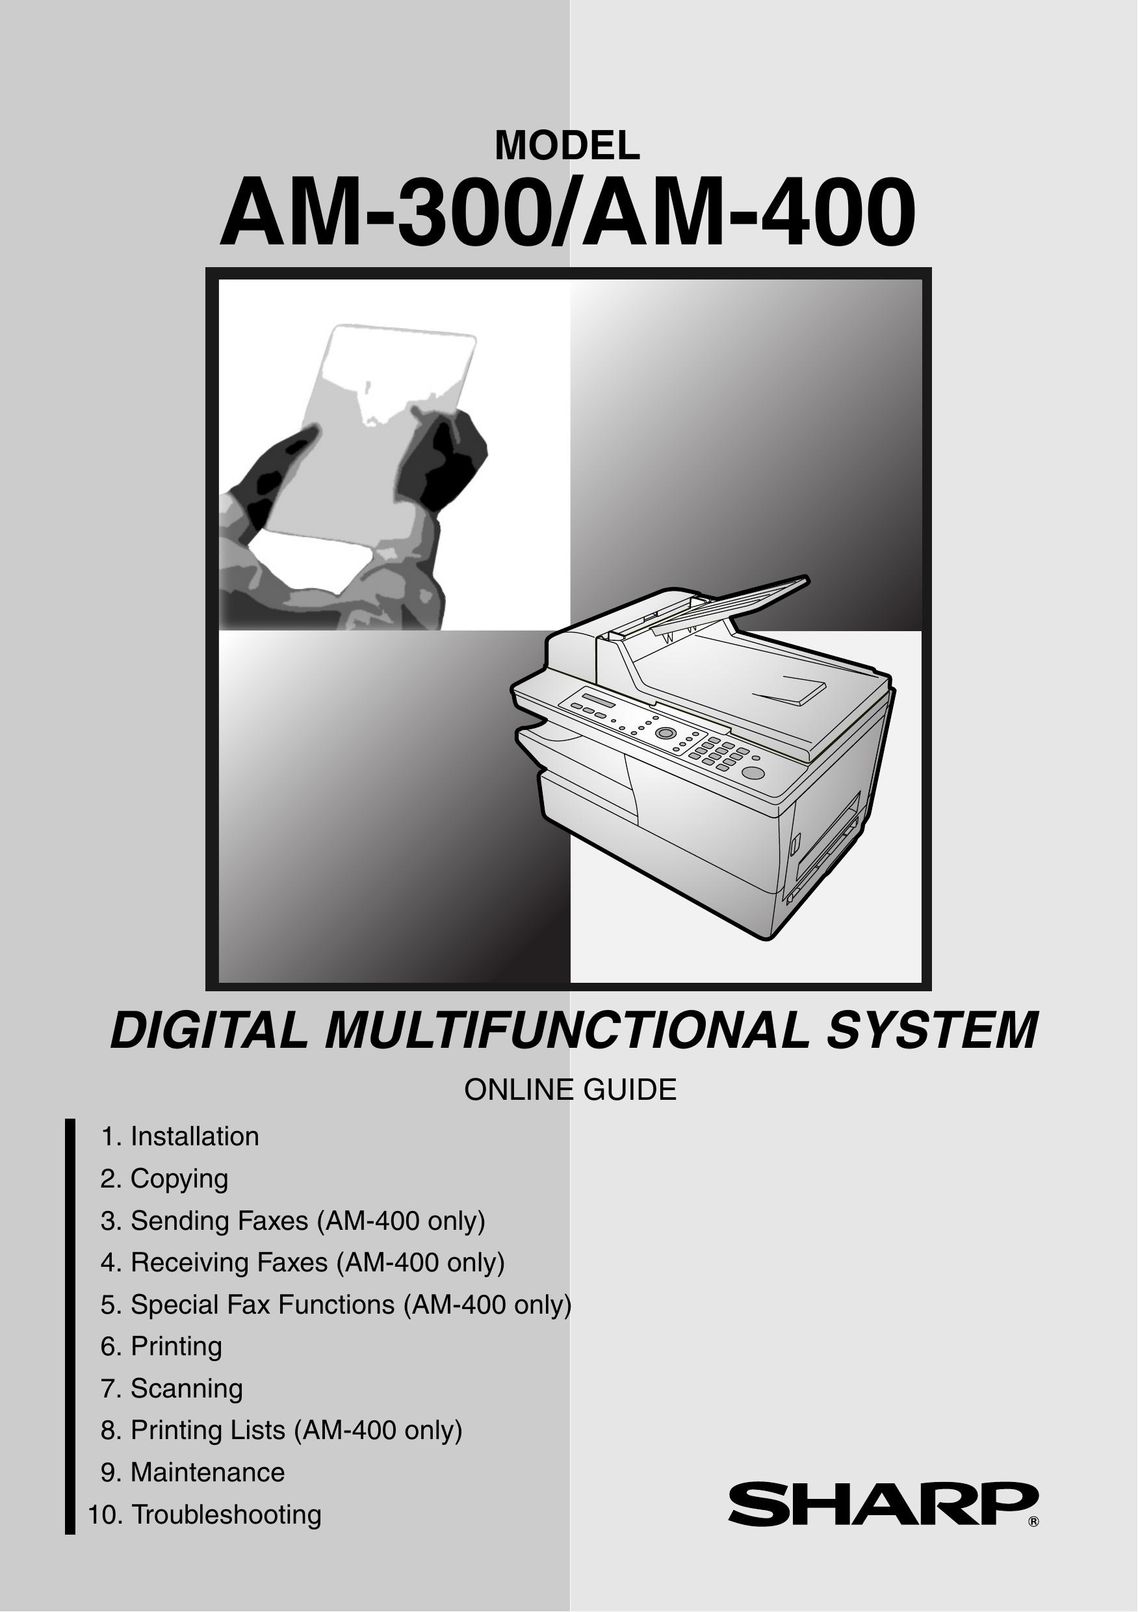 Sharp AM-300 All in One Printer User Manual